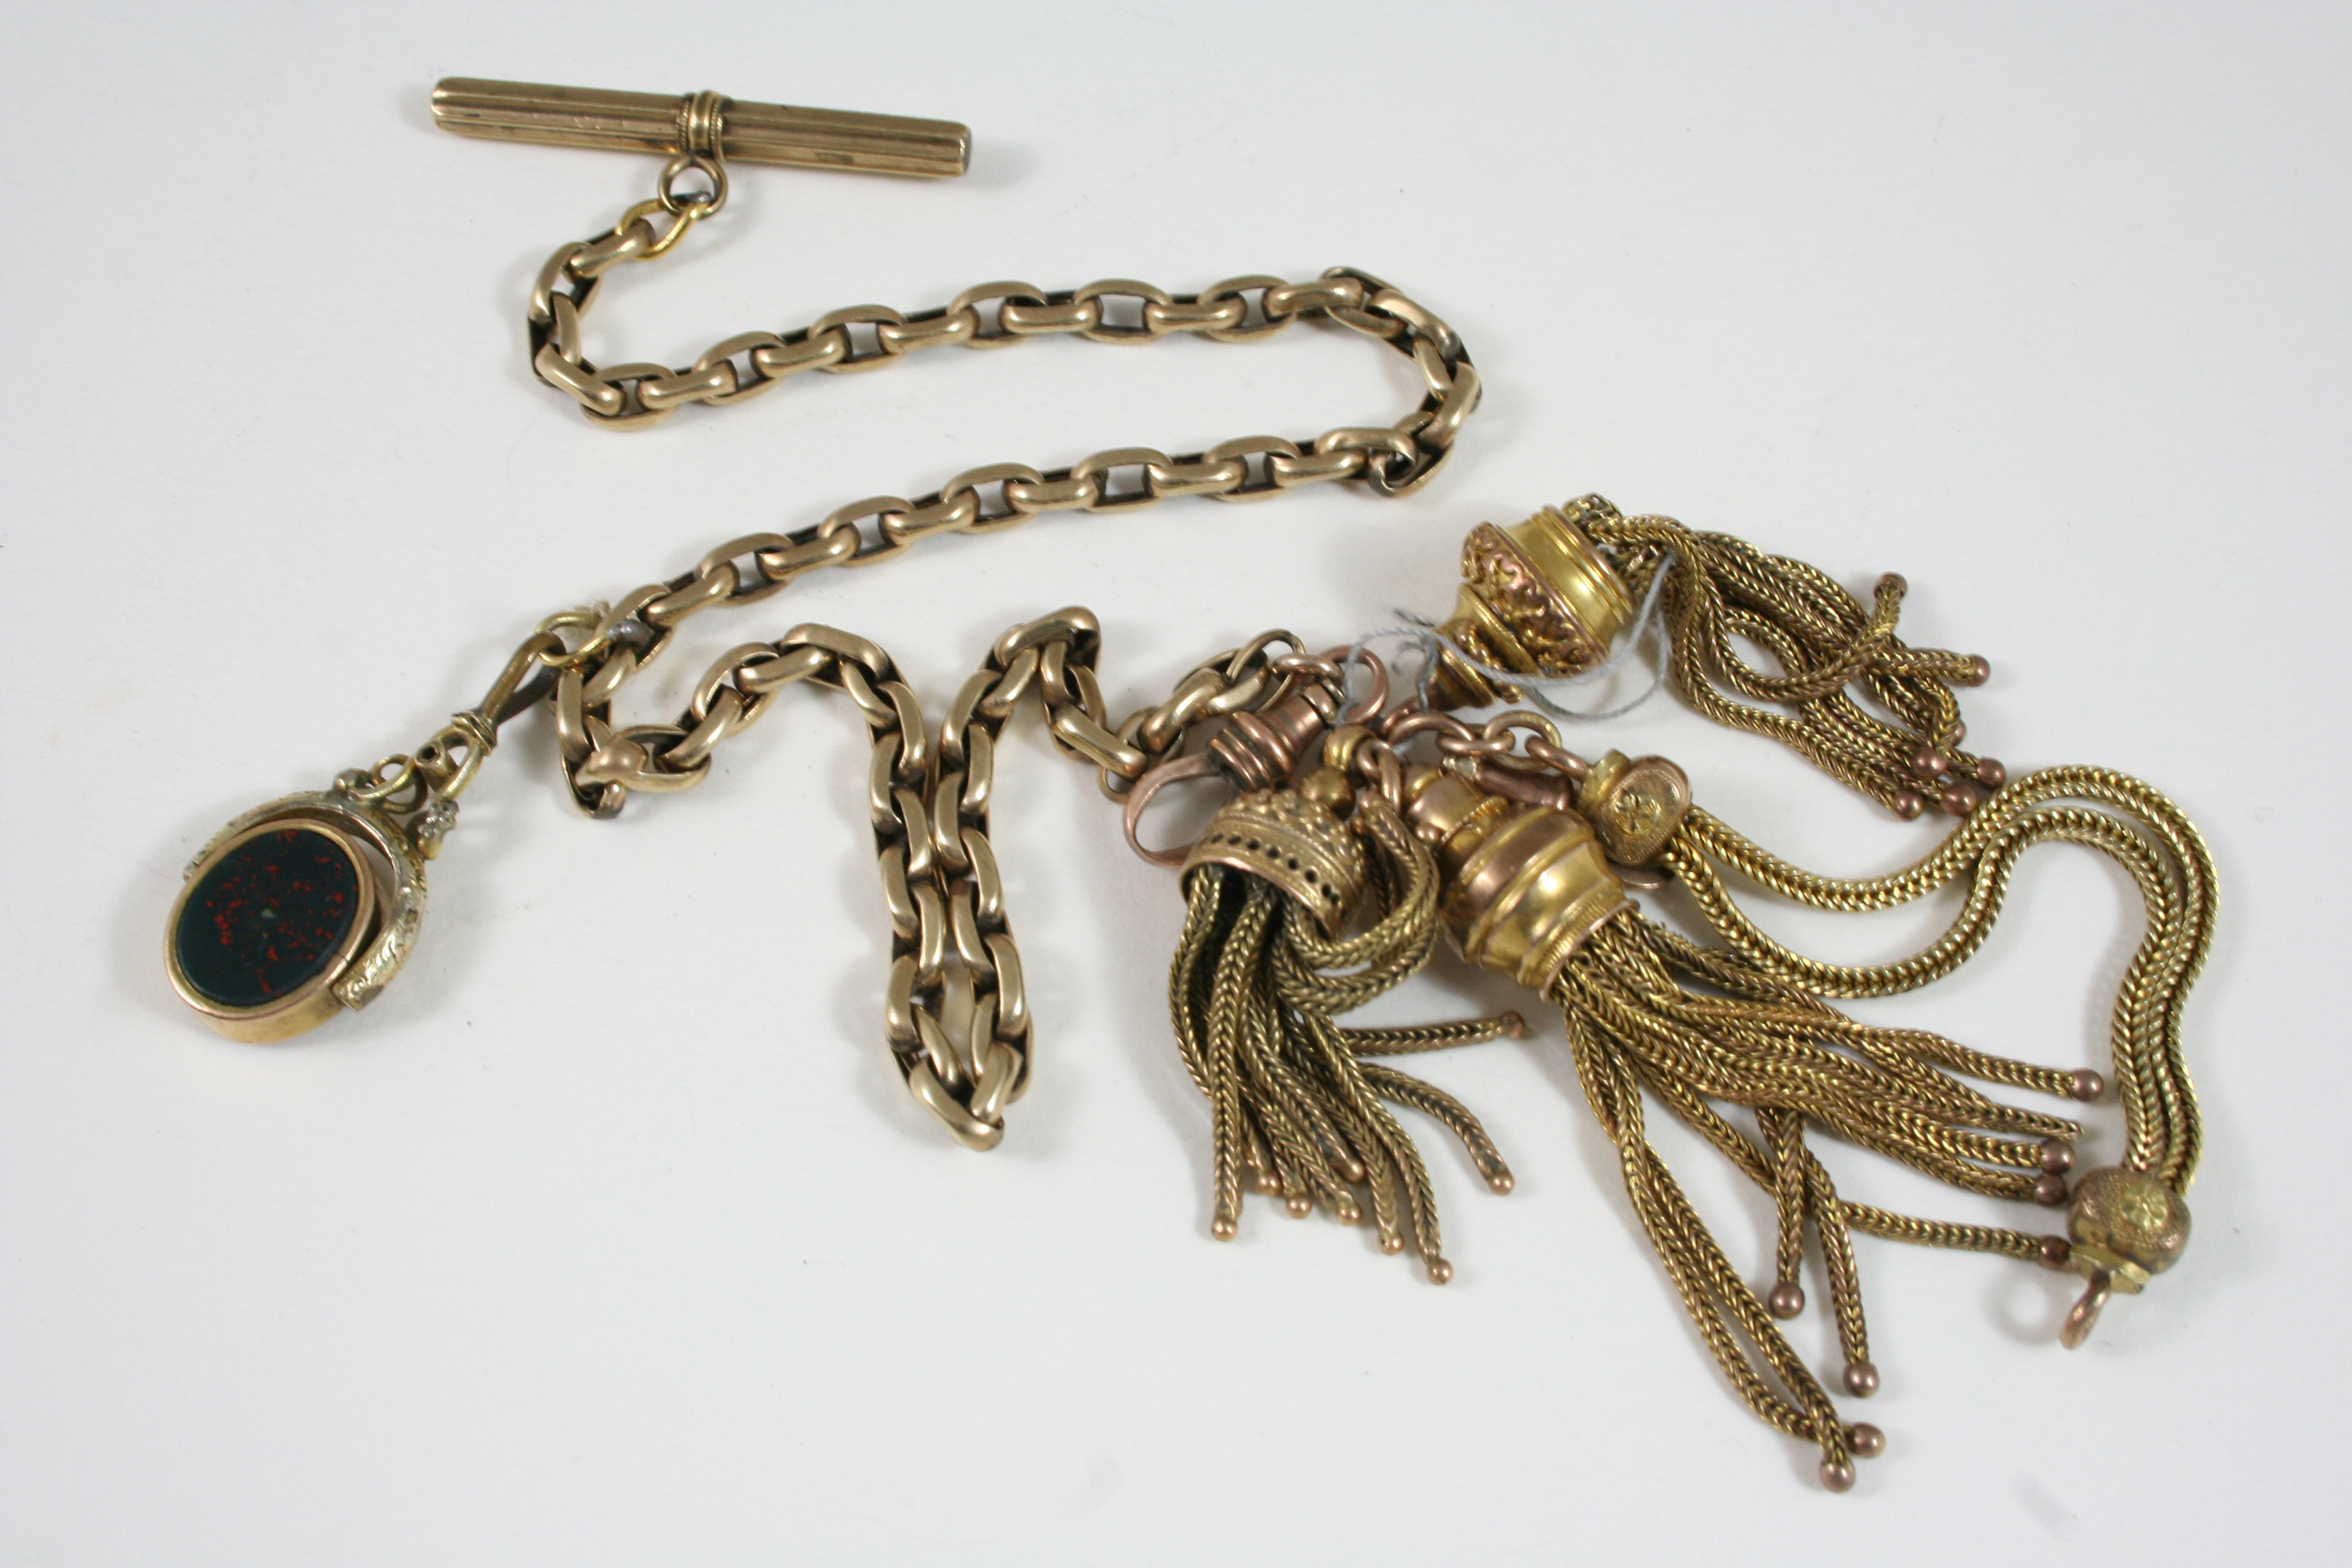 A GOLD WATCH CHAIN with spinning fob and tassels, 29.5cm. long, total weight 35 grams.